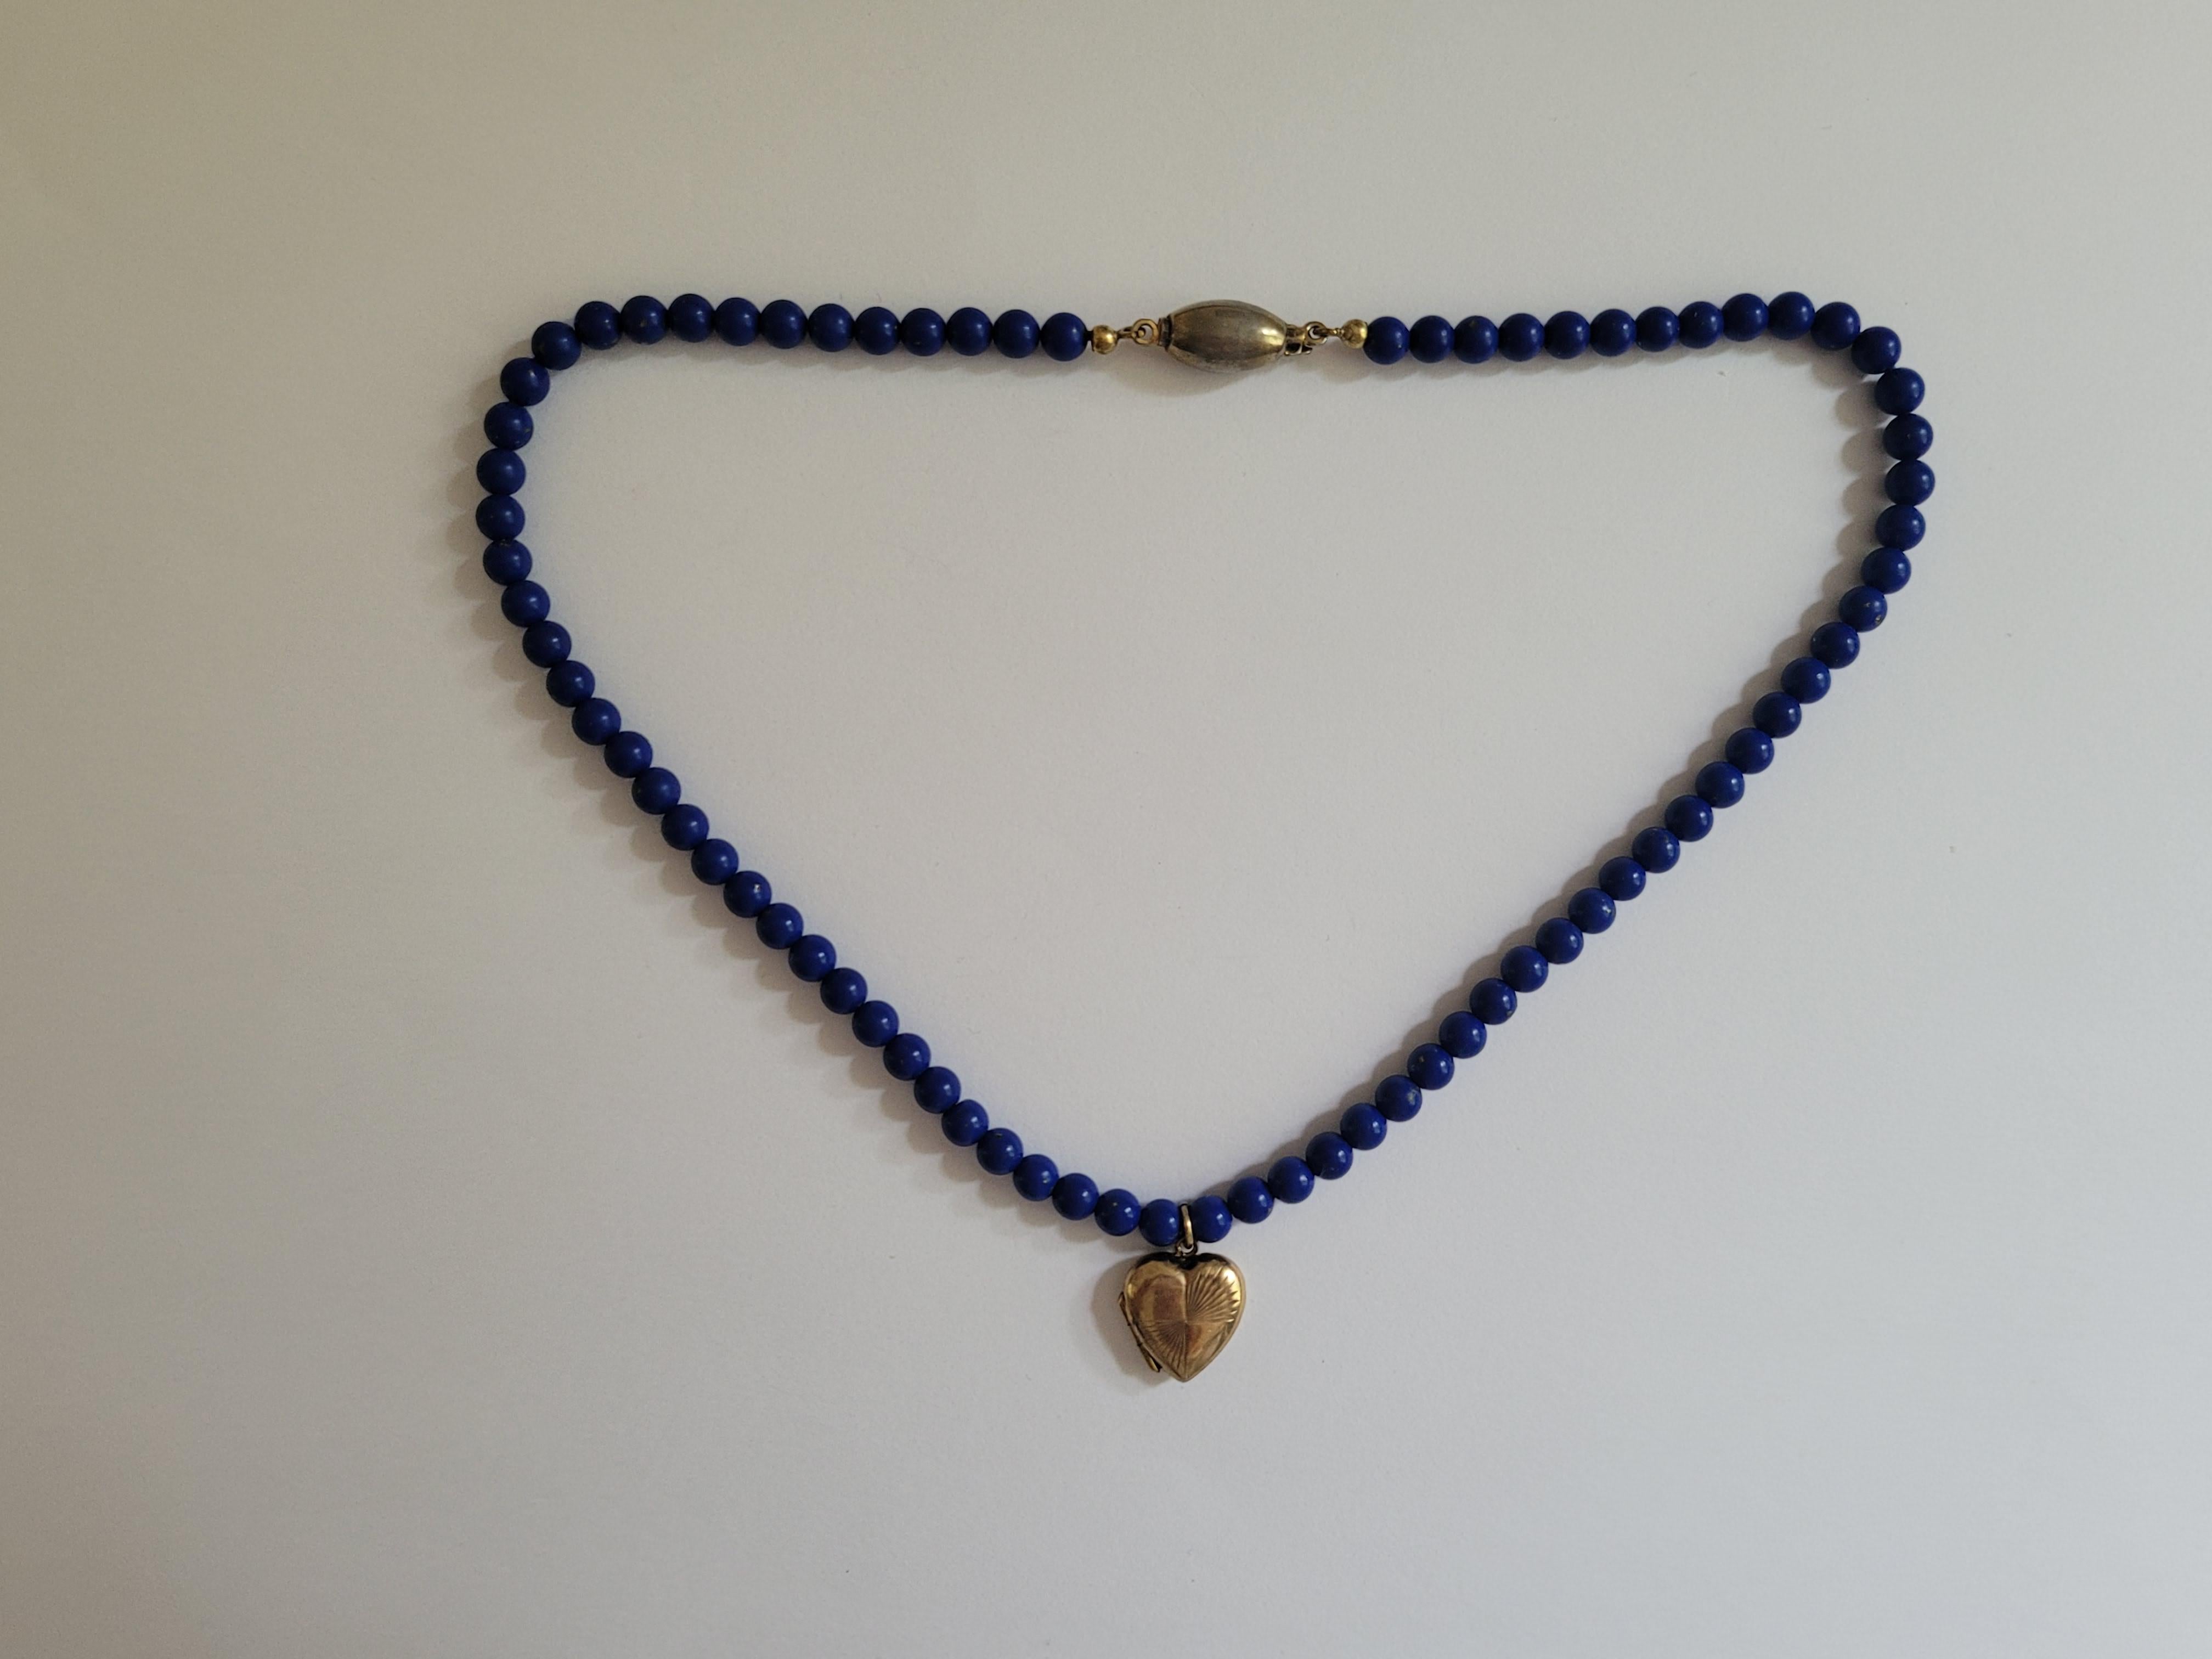 A Lovely Vintage 9 Carat Gold Back and Front locket on Lapis Lazuli beads necklace. One of a kind necklace and looks lovely when worn. English origin locket and Continental beads necklace.
Width of the locket 14mm.
Length of the necklace including